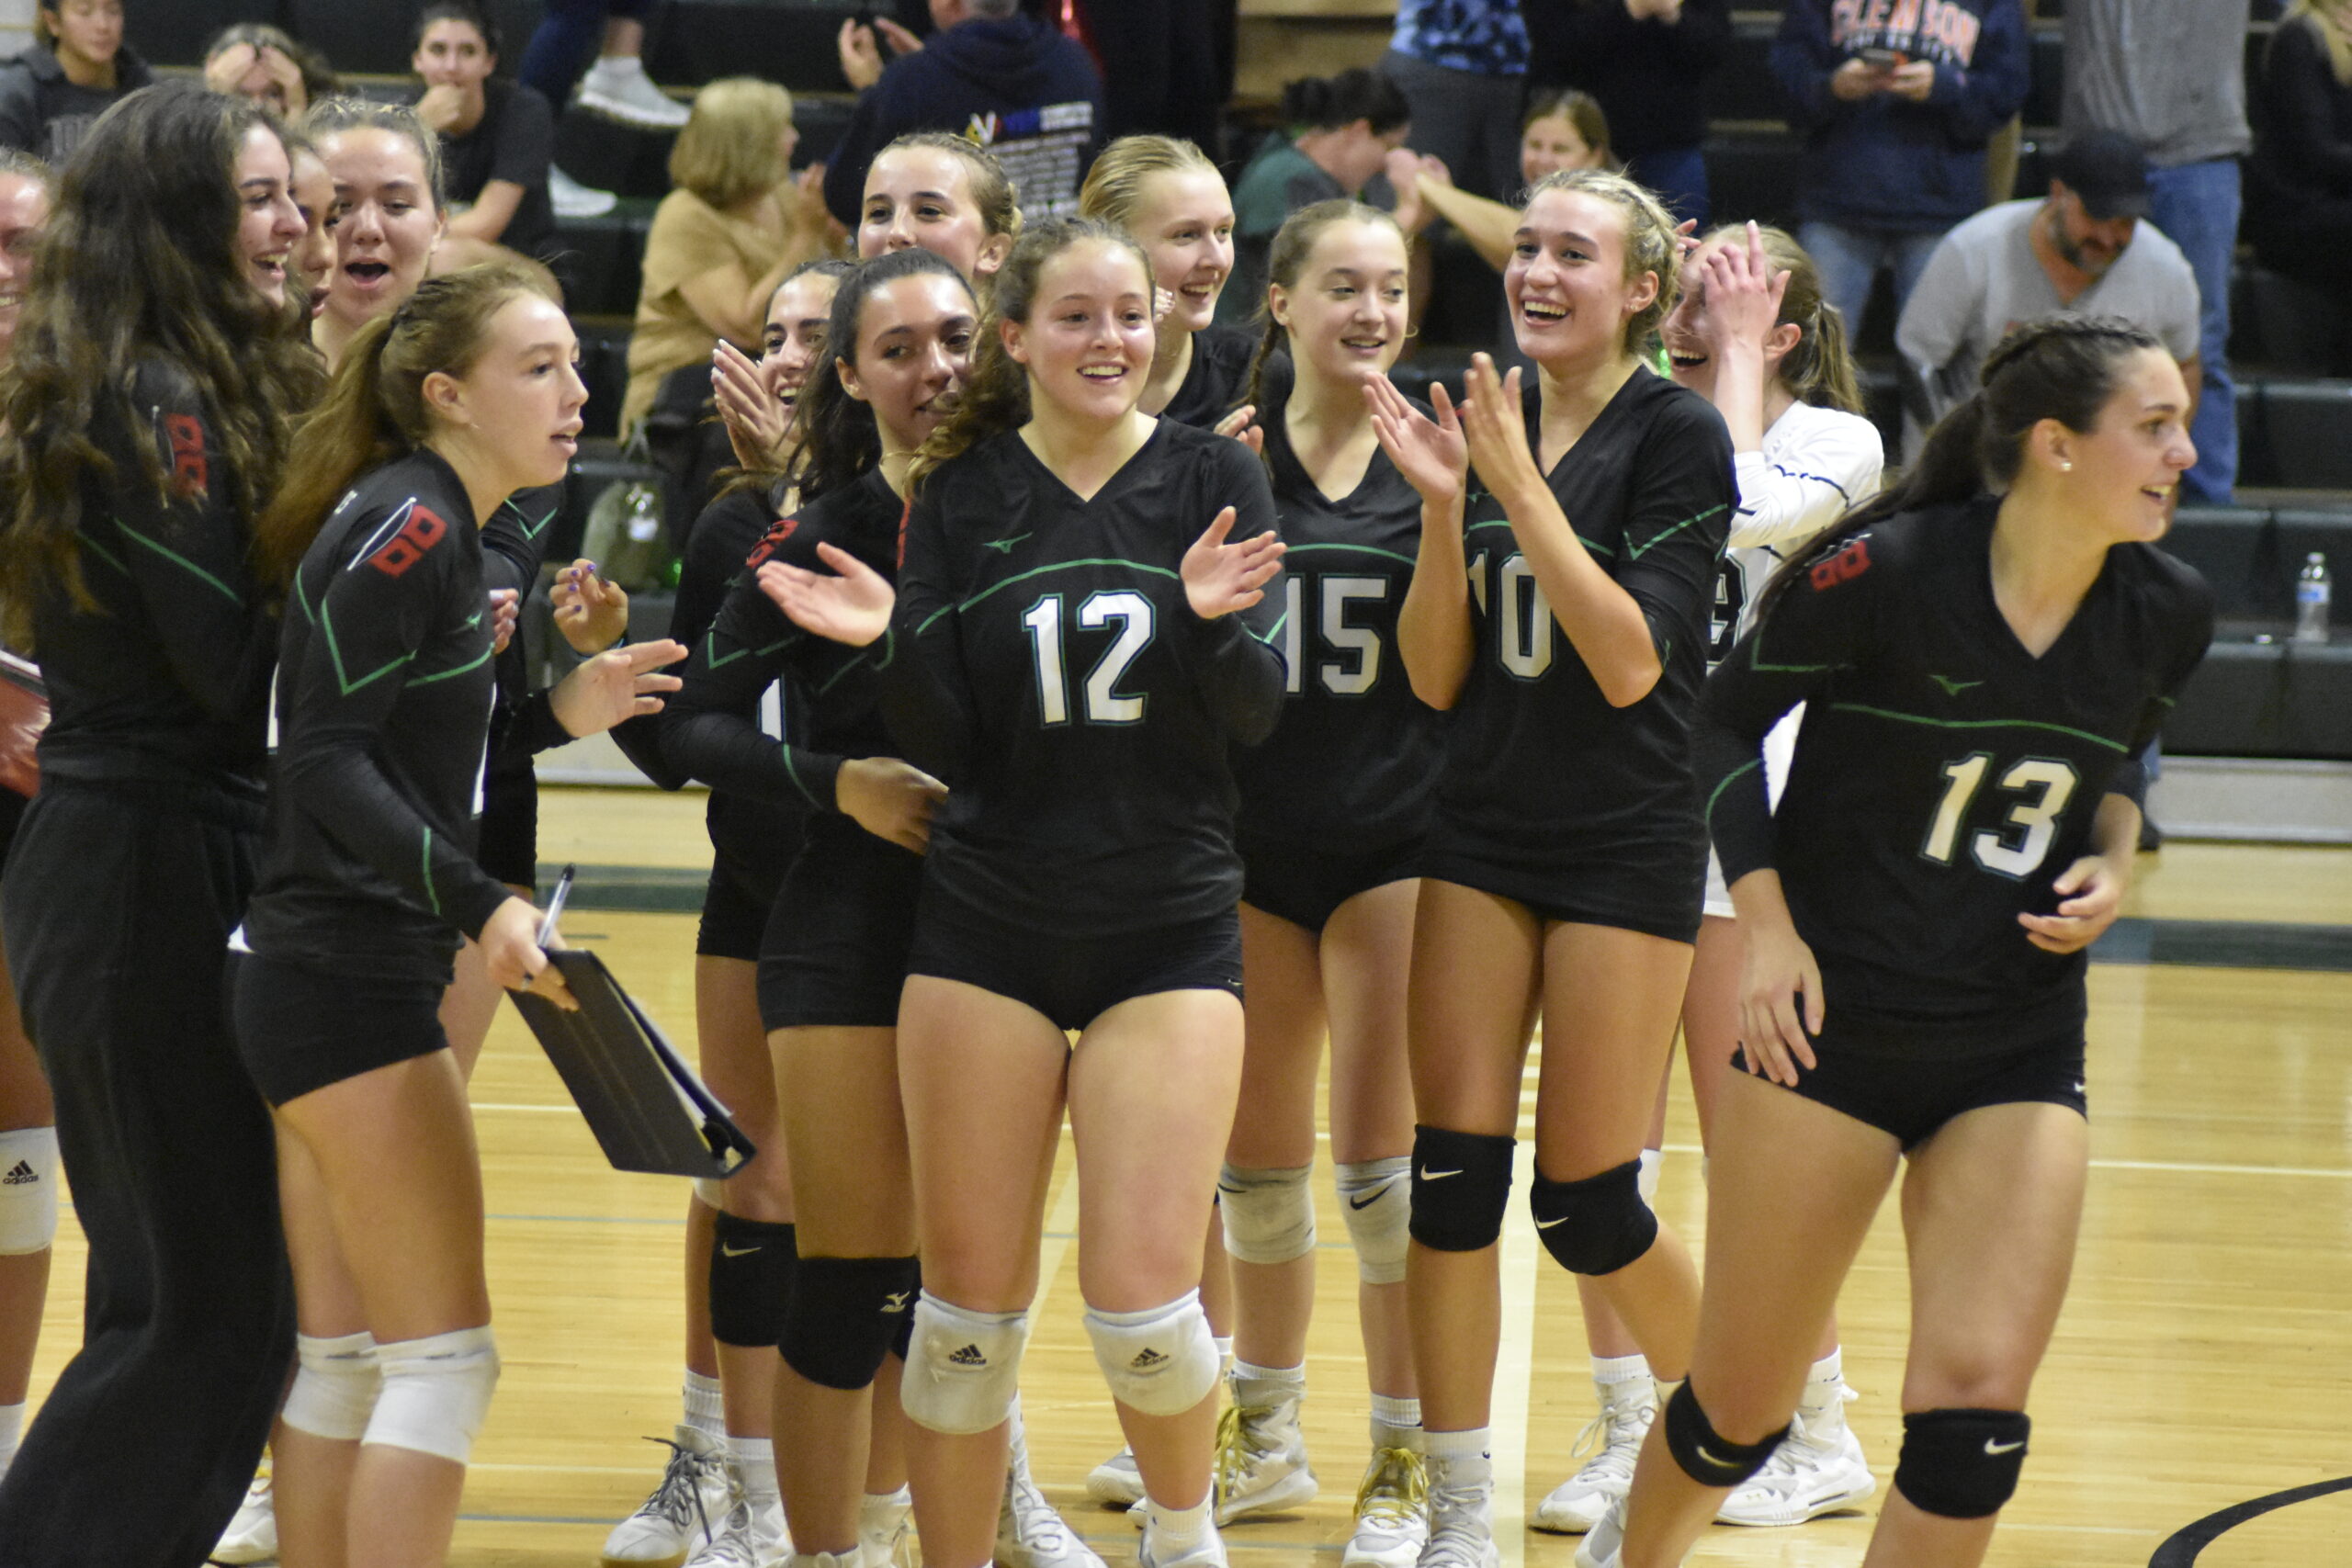 The Westhampton Beach girls volleyball team defeated host Harborfields, 3-2, on Tuesday night to advance to the county semifinals.    DREW BUDD